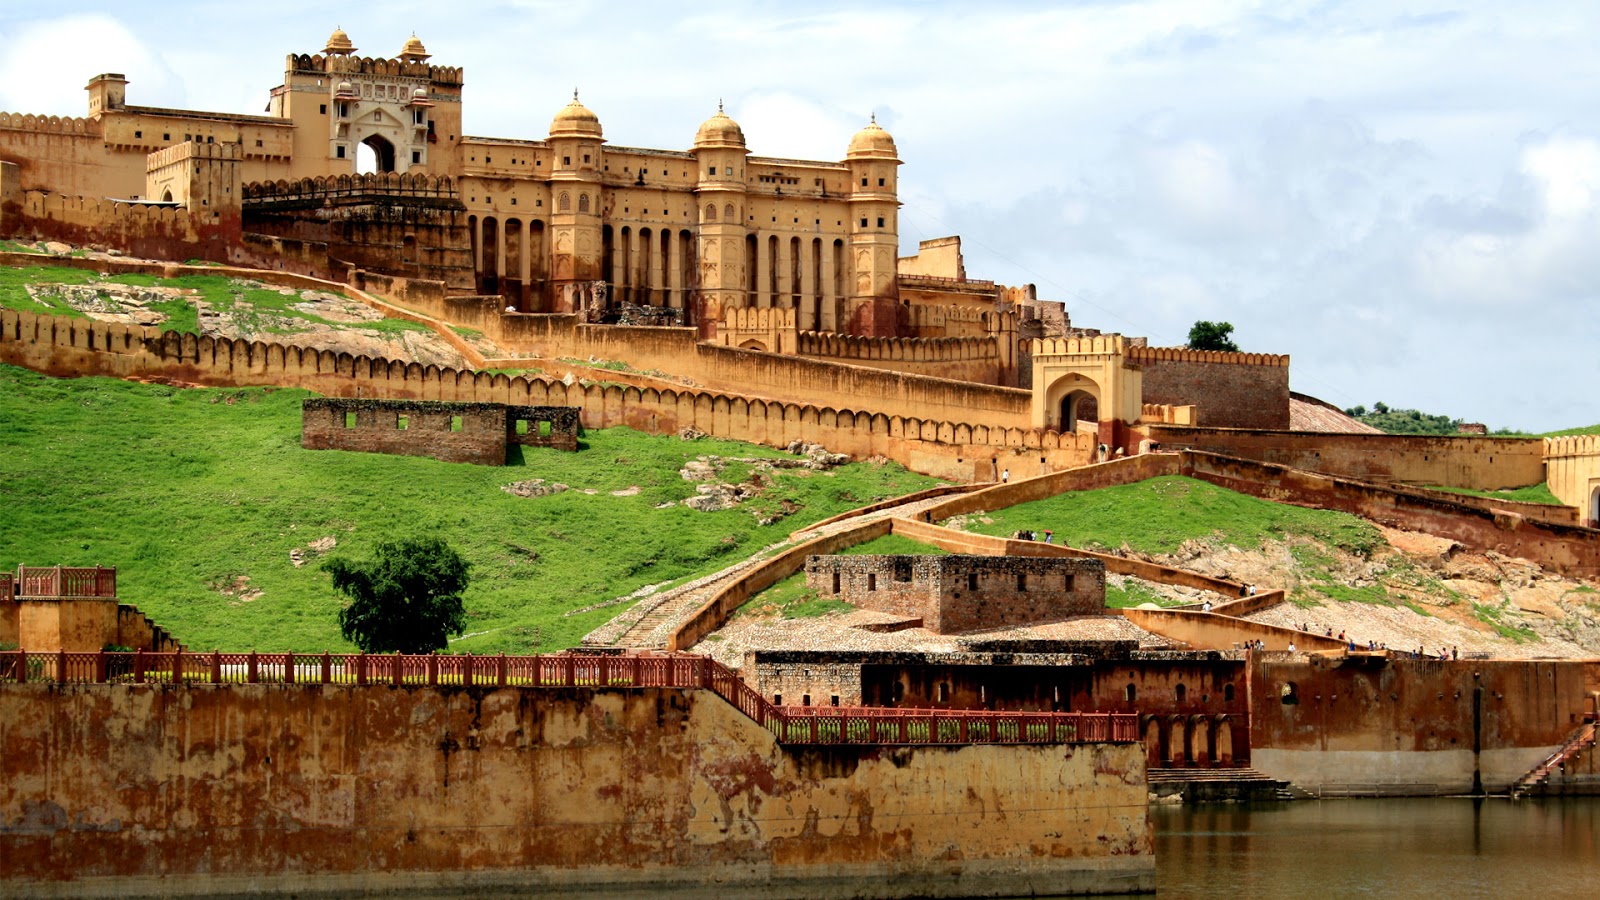 Jaipur Full HD Wallpapers 1080p | HD Wallpapers (High Definition